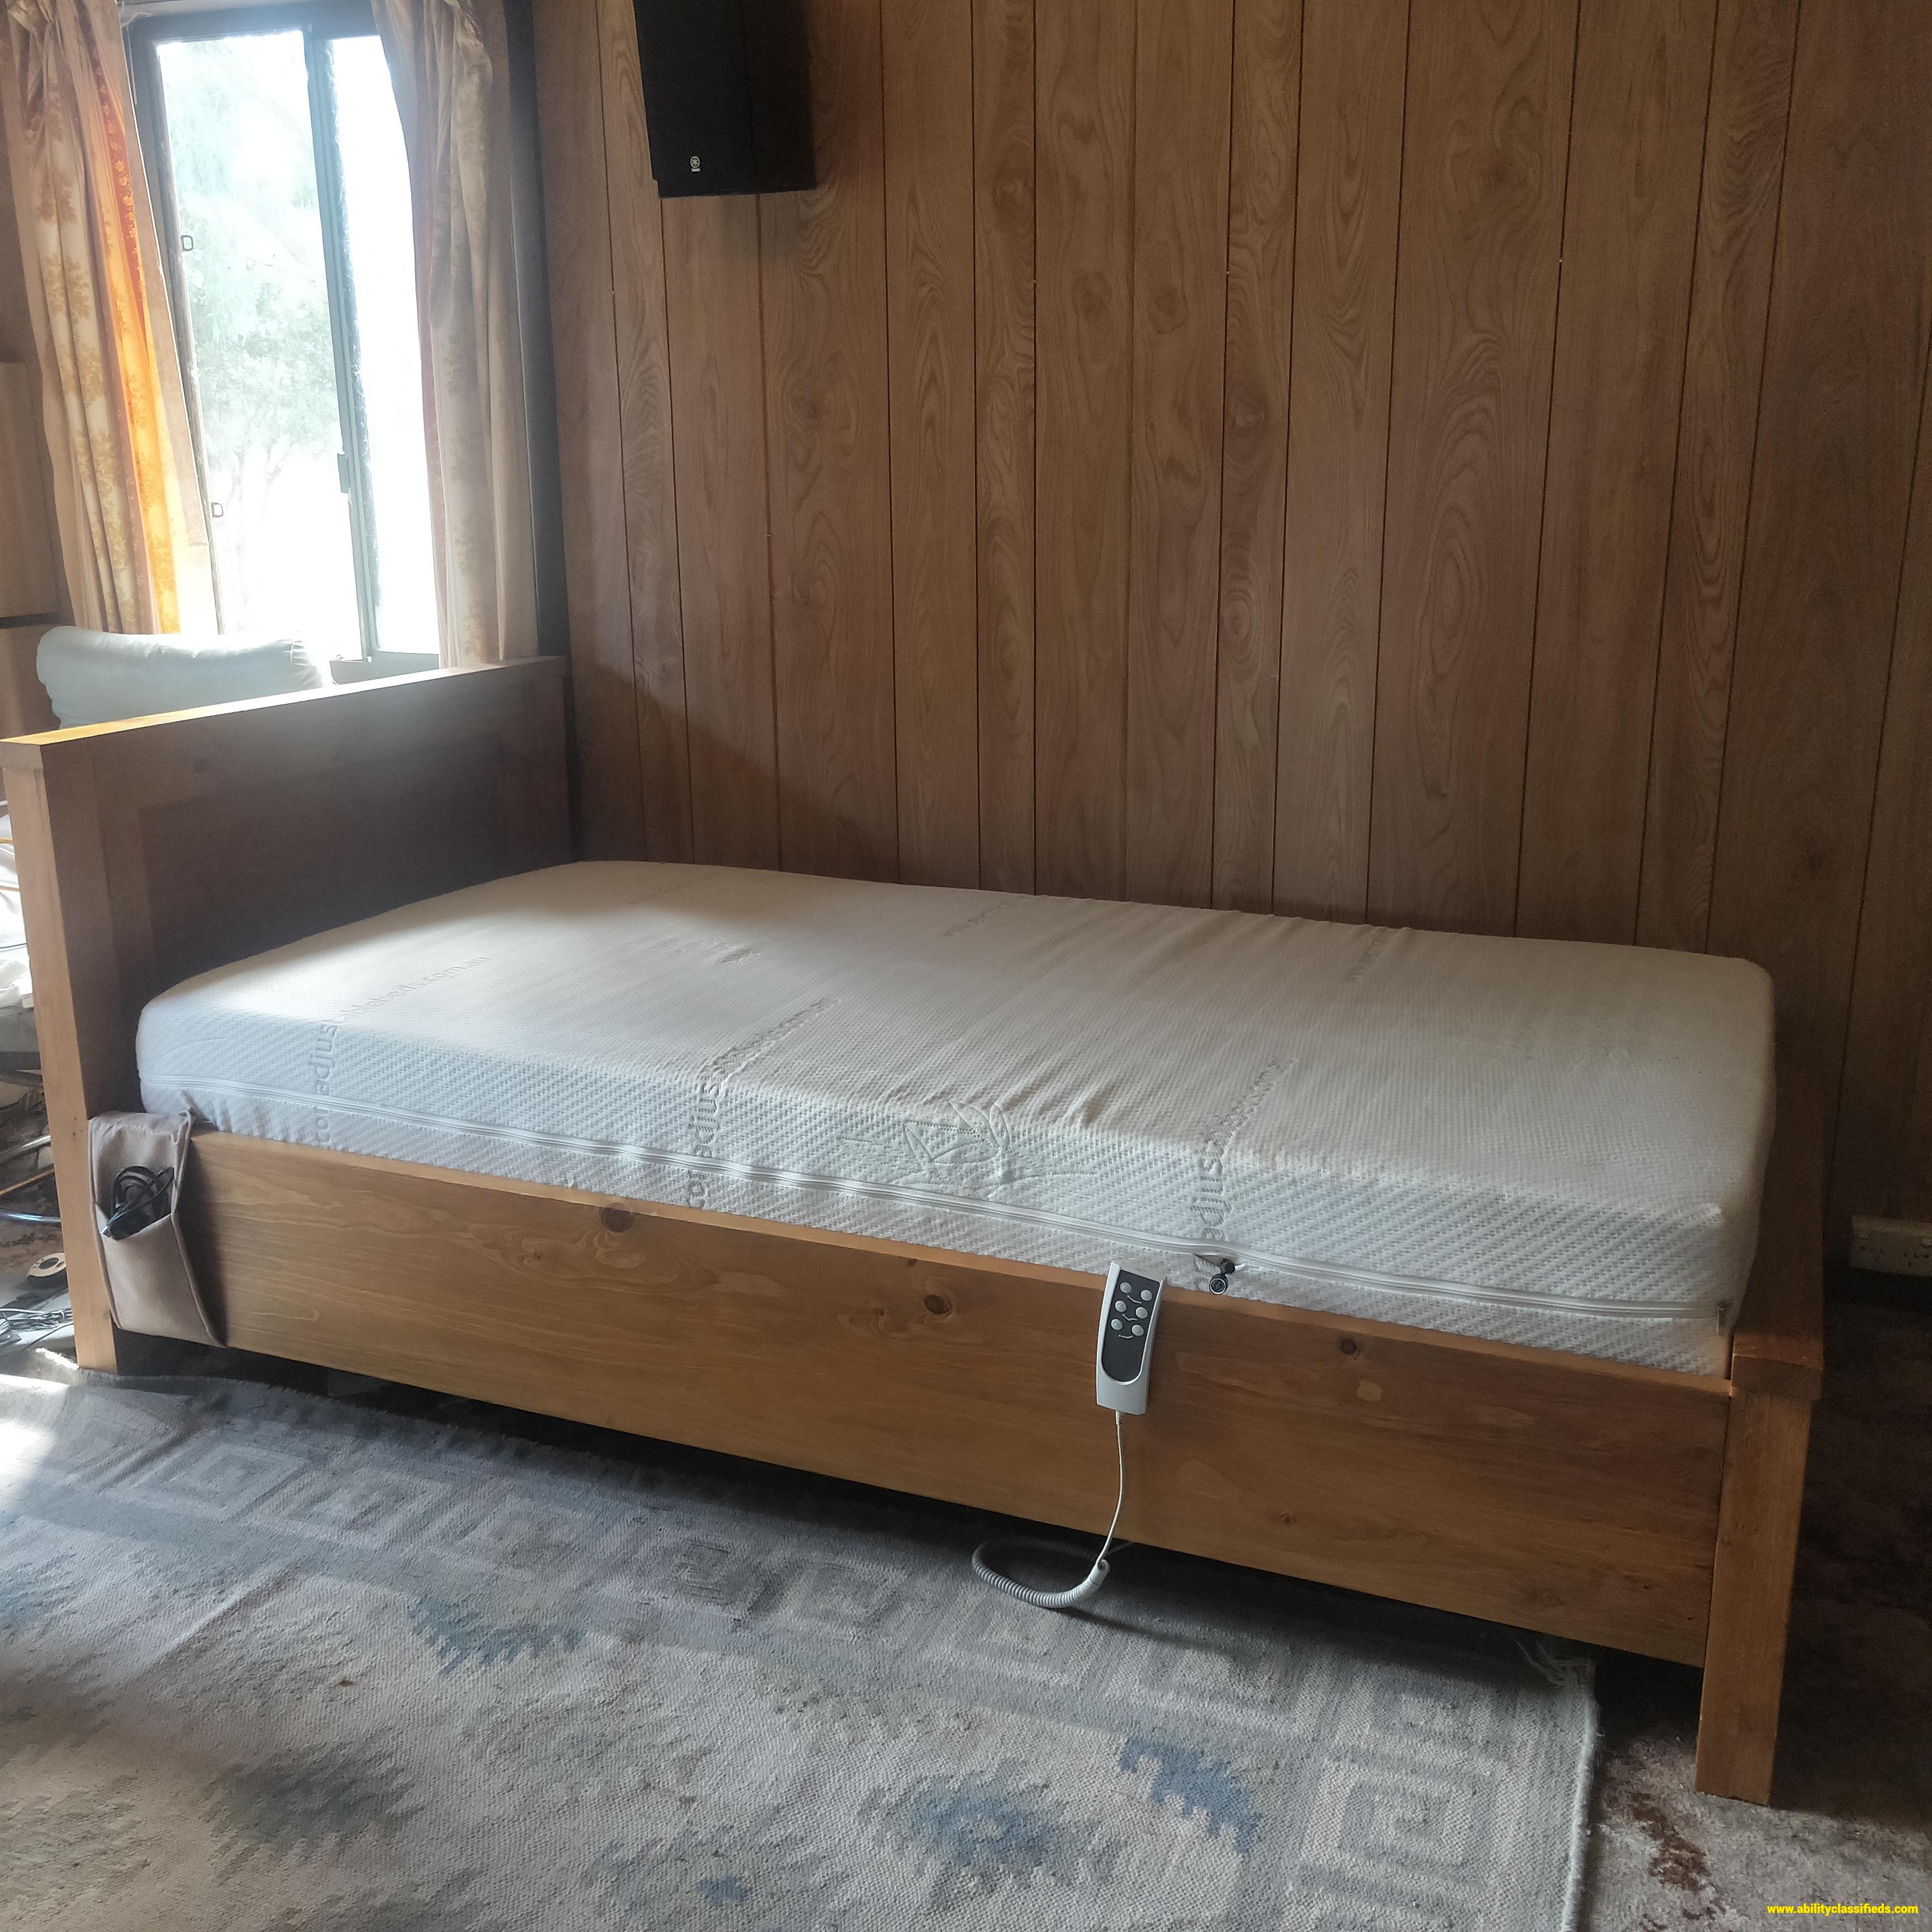 Electric, adjustable king single bed - excellent condition